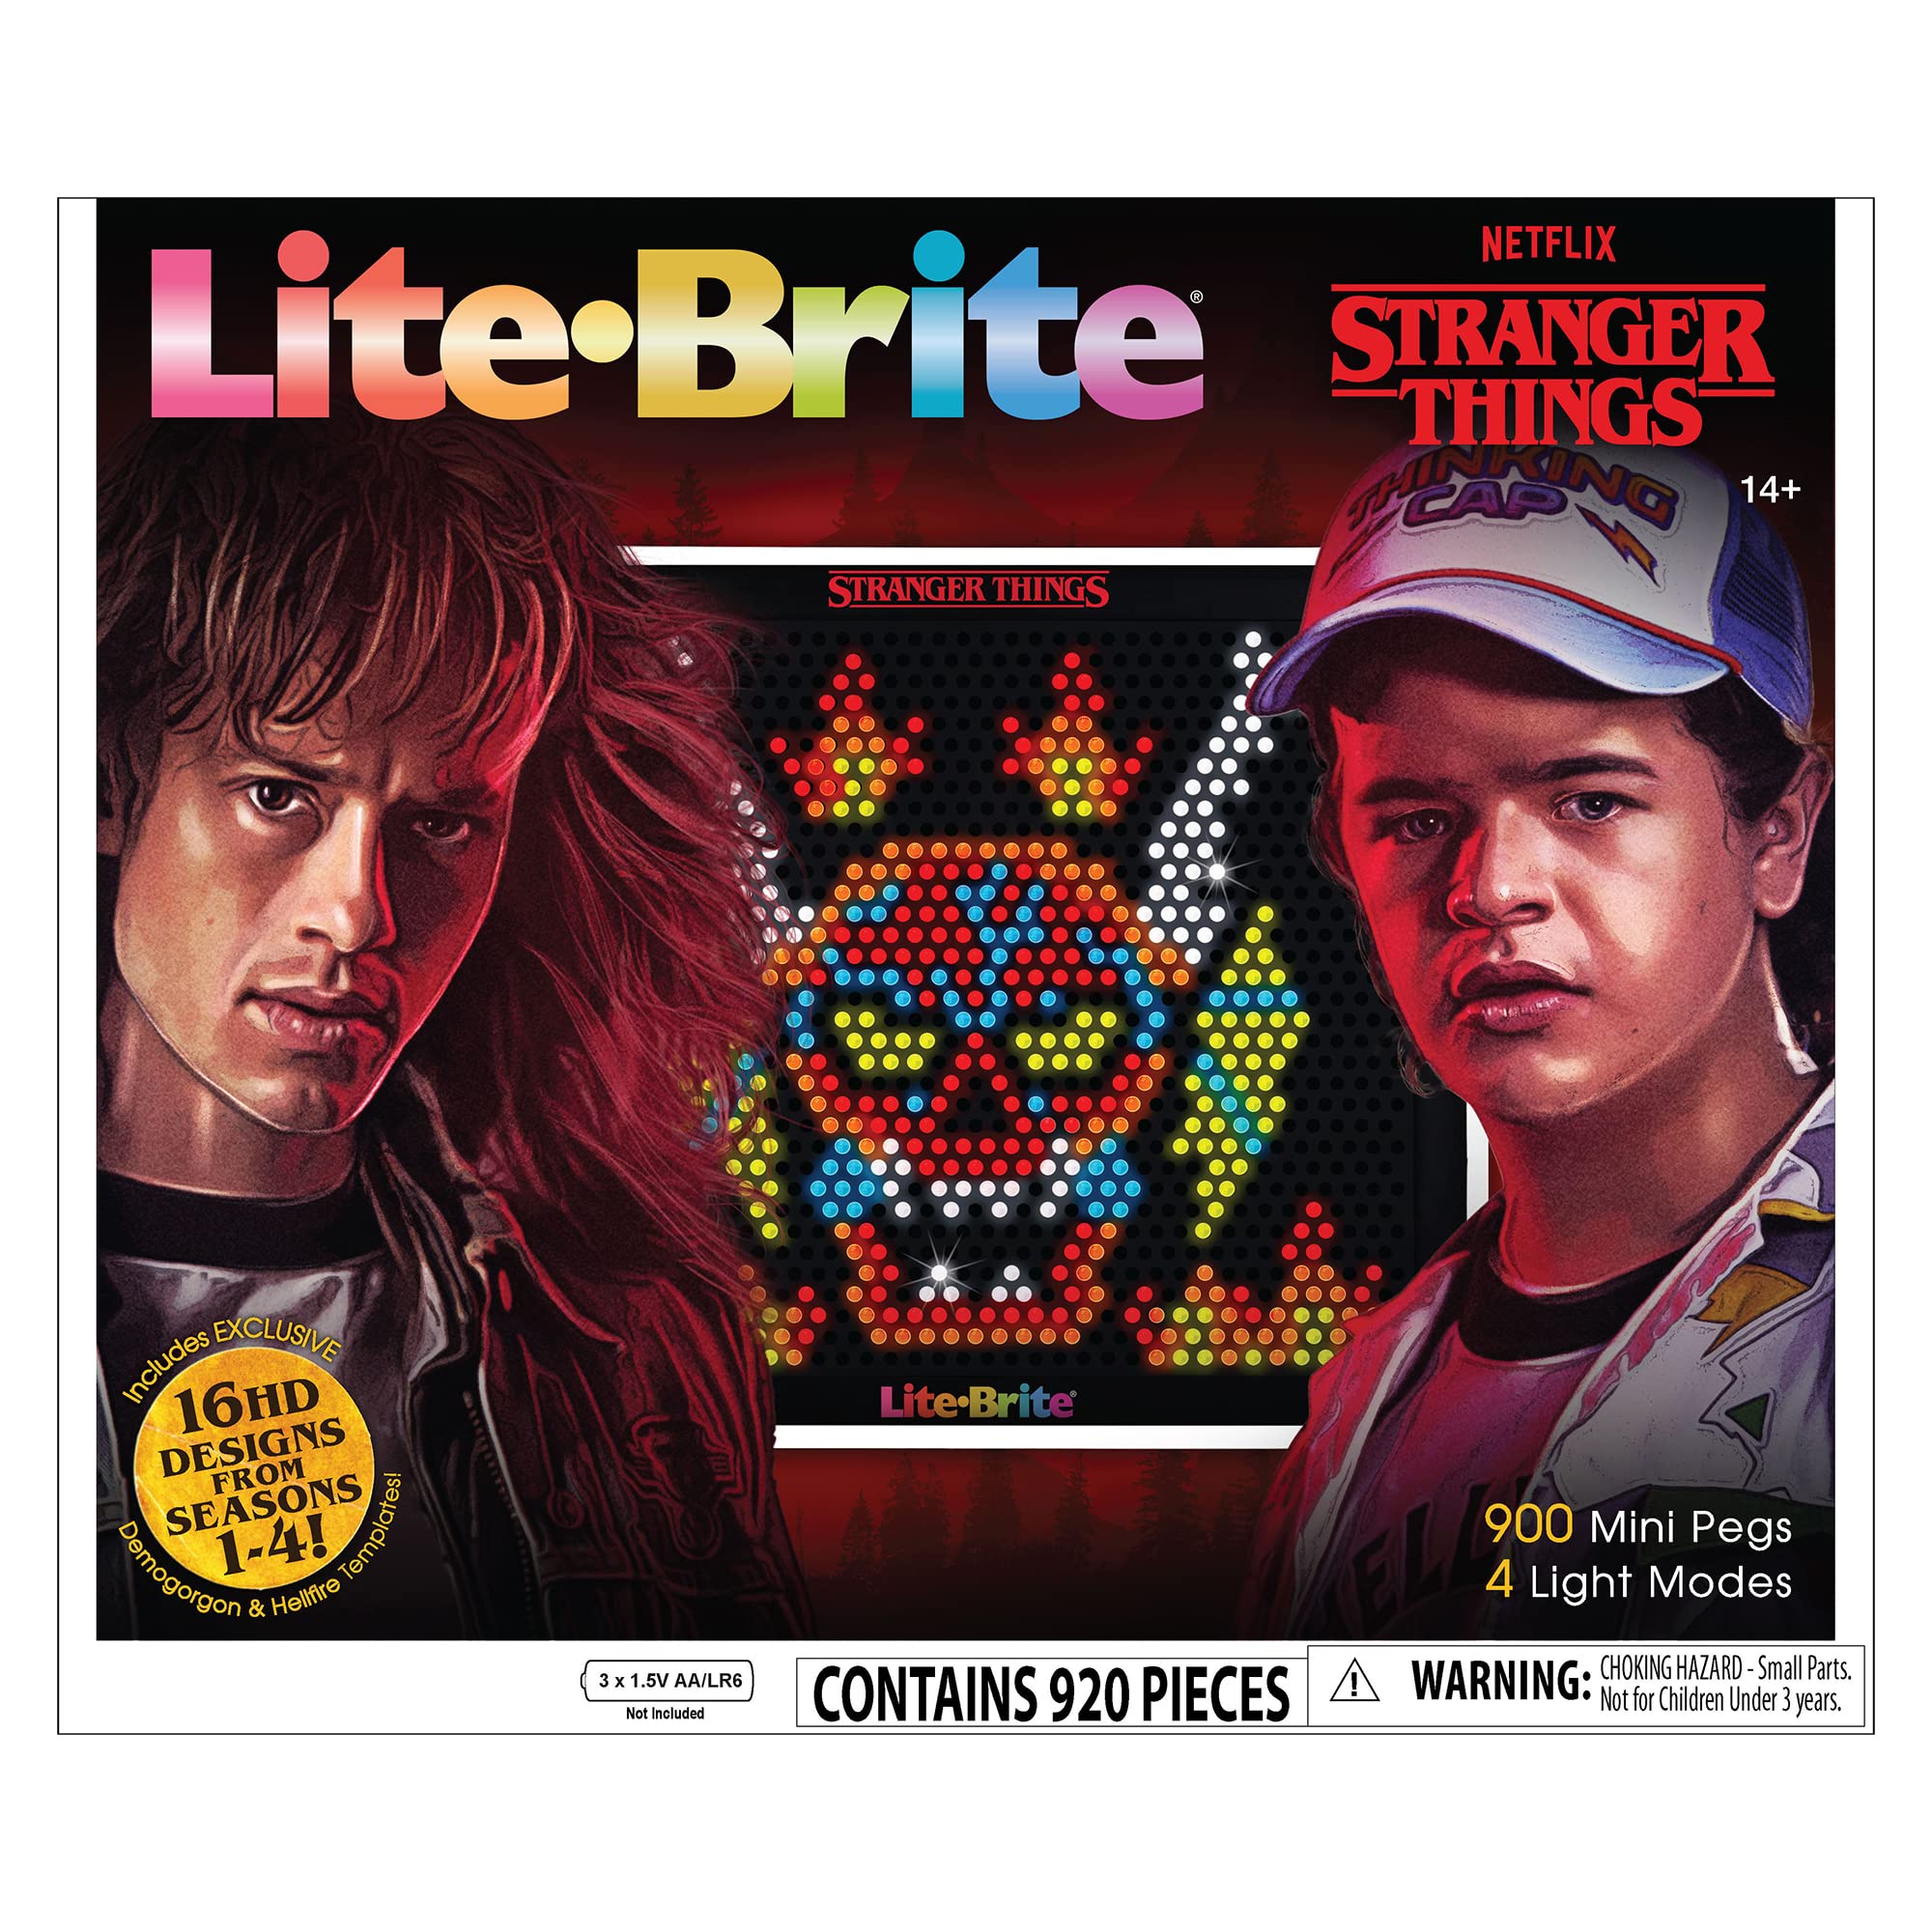 Stranger Things Special Edition Lite-Brite (Demogorgon Hunters) w/ 16 HD Templates, 900 Mini Pegs, Stickers, & Storage Pouch $15.97 + Free Shipping w/ Prime or on $25+